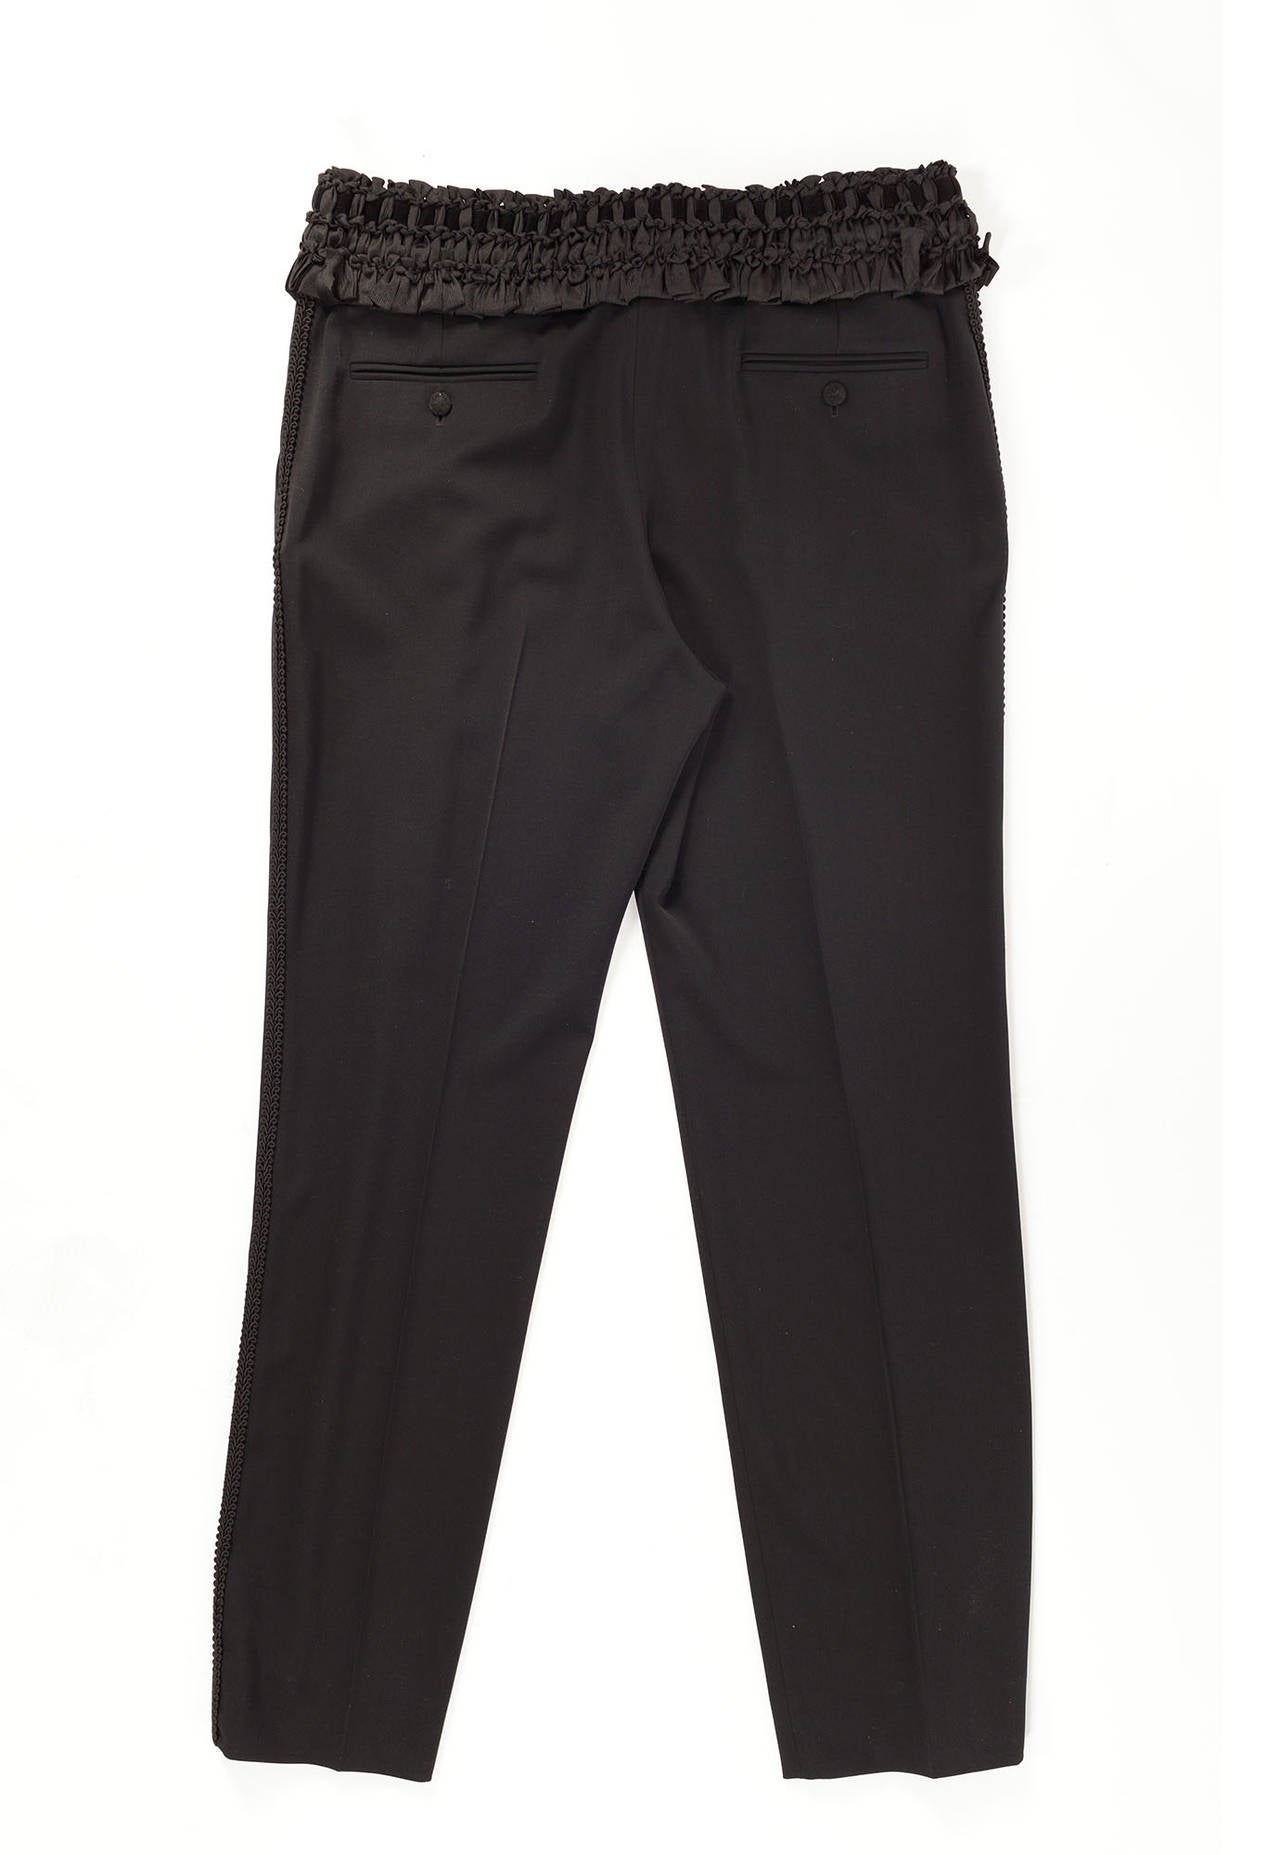 Black Yves Saint Laurent by Stefano Pilati wool pant with ruffle details SS06, Sz 12